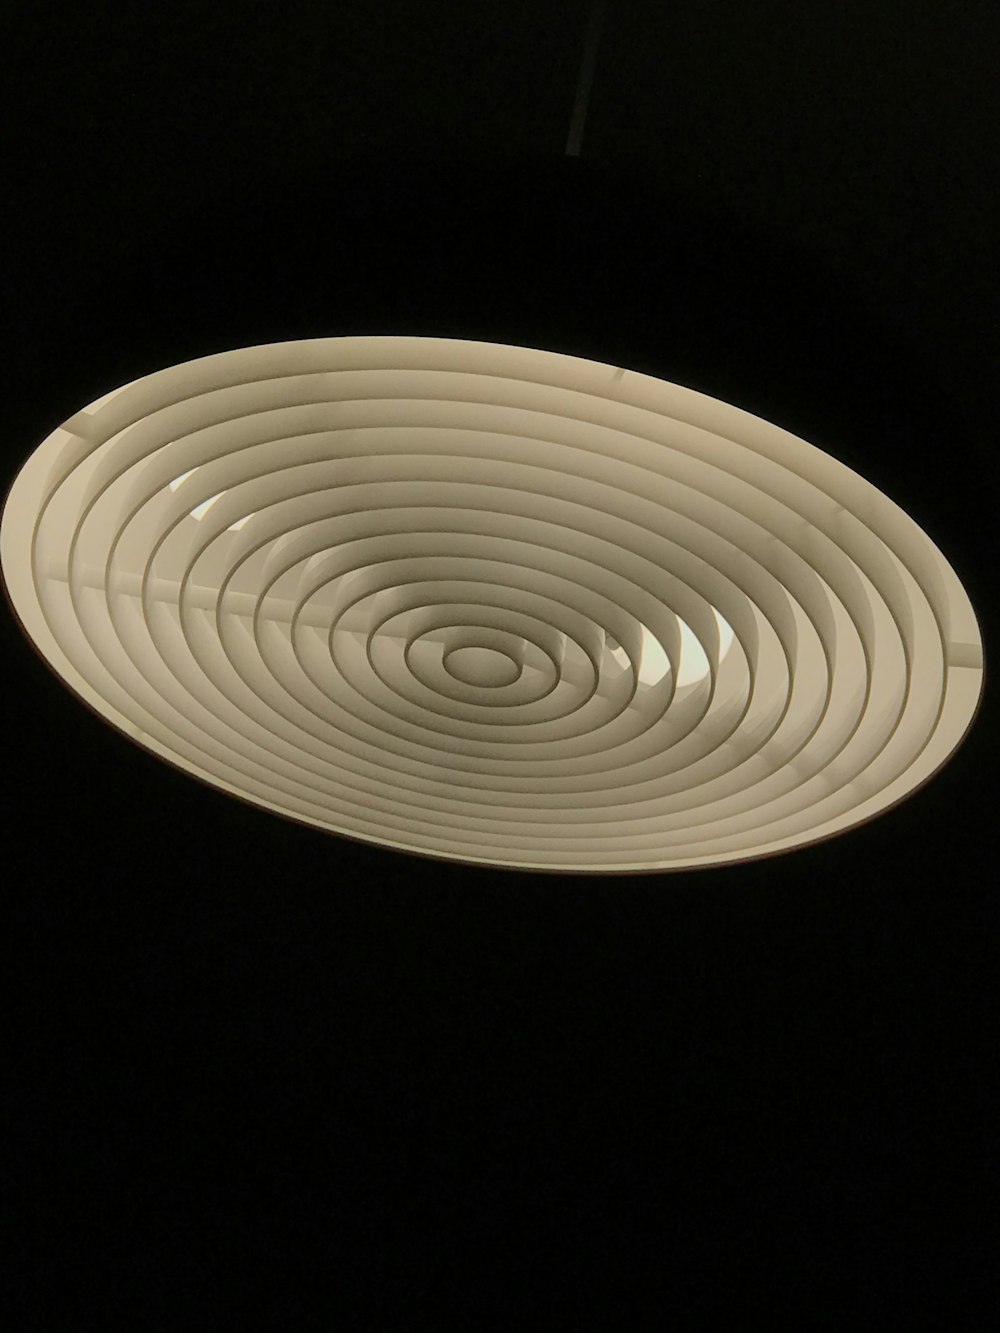 a white circular object hanging from a ceiling